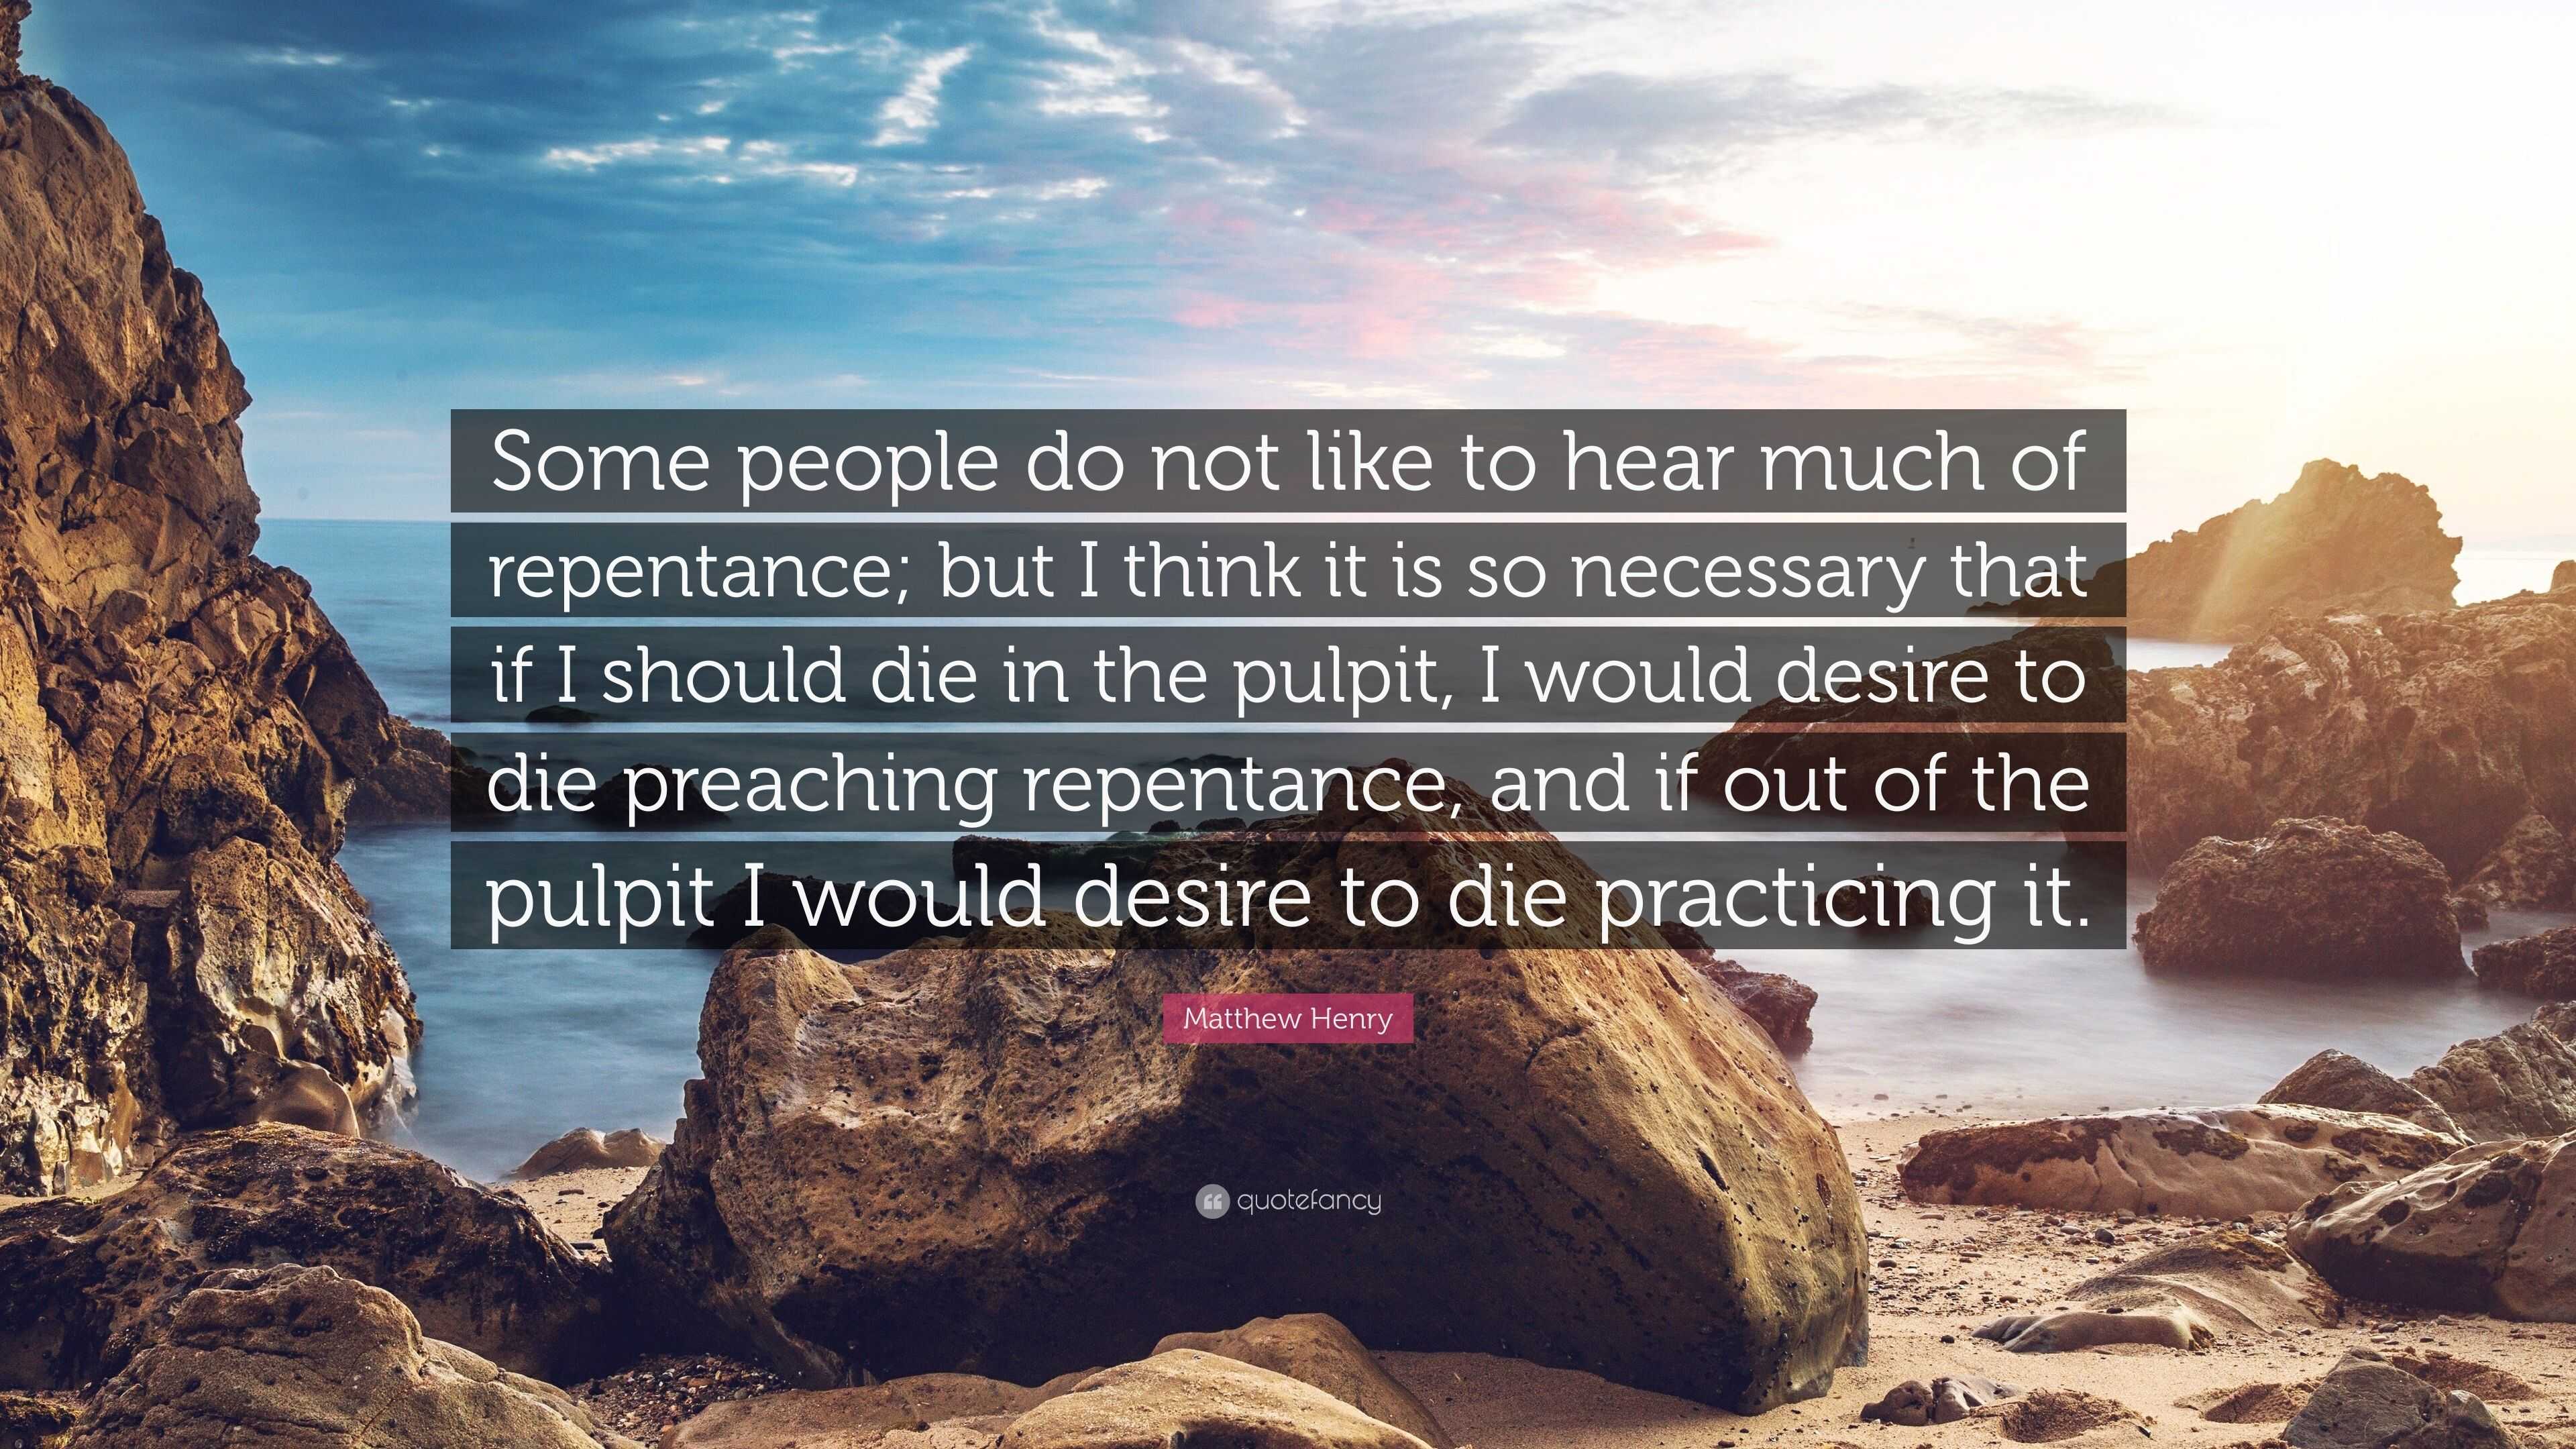 Matthew Henry Quote: “Some people do not like to hear much of repentance;  but I think it is so necessary that if I should die in the pulpit, I...”